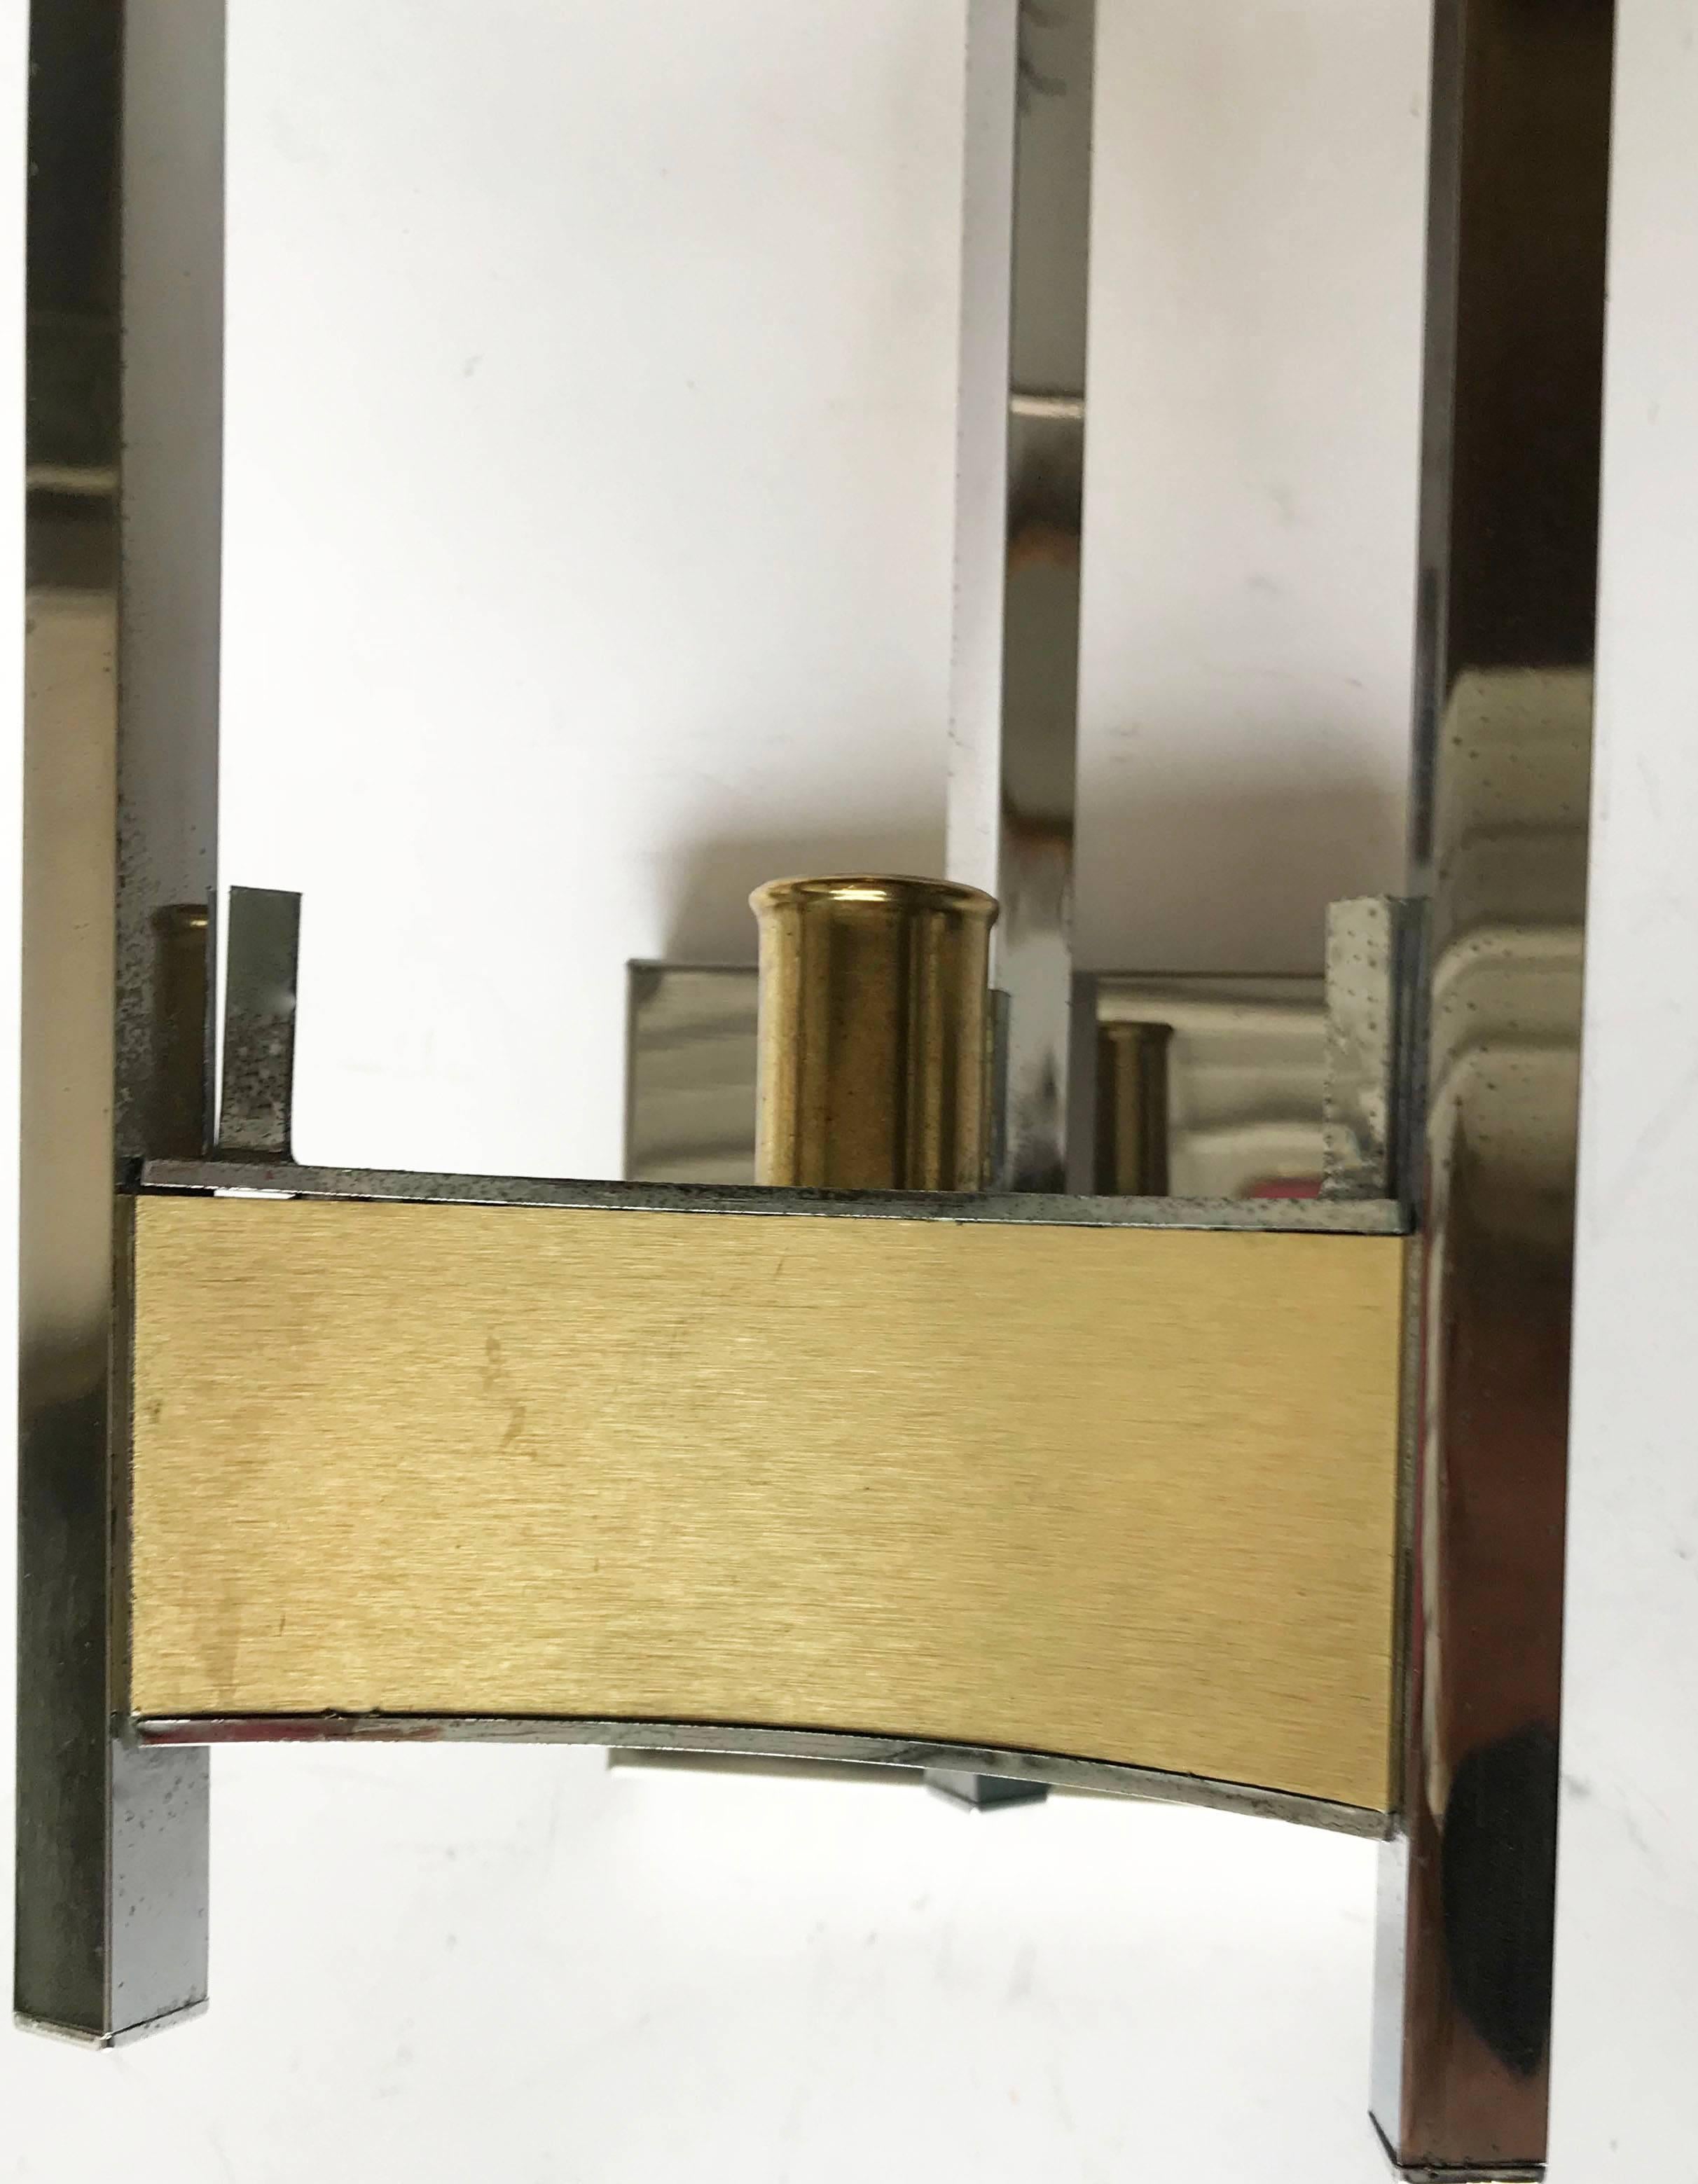 Pair of one light Gaetano Sciolari sconces, brass and chrome finish 
US rewire and in working condition 
One light, 100 watts max bulb
 Square back plate: 4.3/8 inches x 4.3/8 inches.
Two pairs available. Priced by pair.